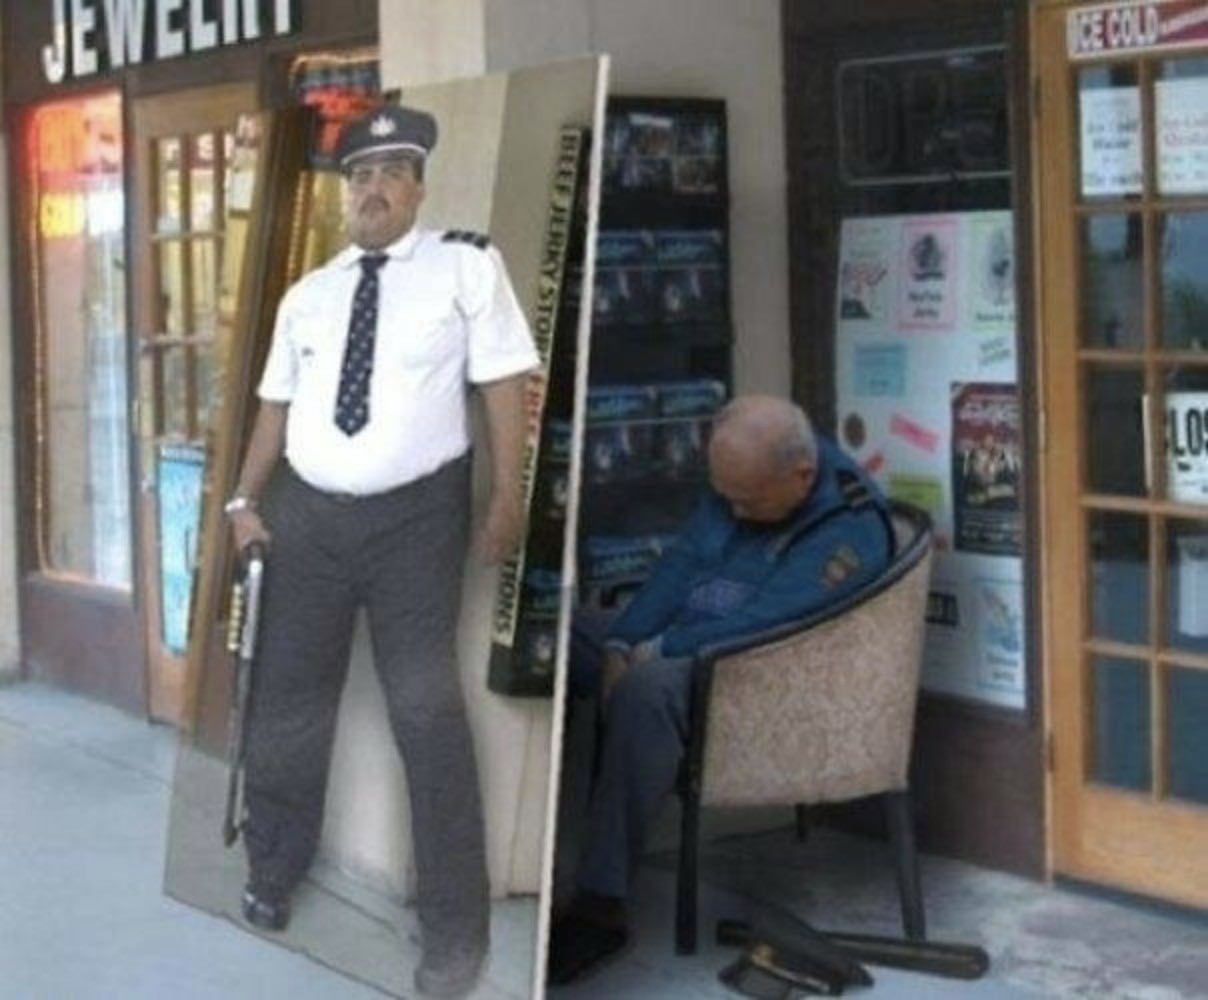 No "Security Guard Sleeps" memes have been featured yet. 